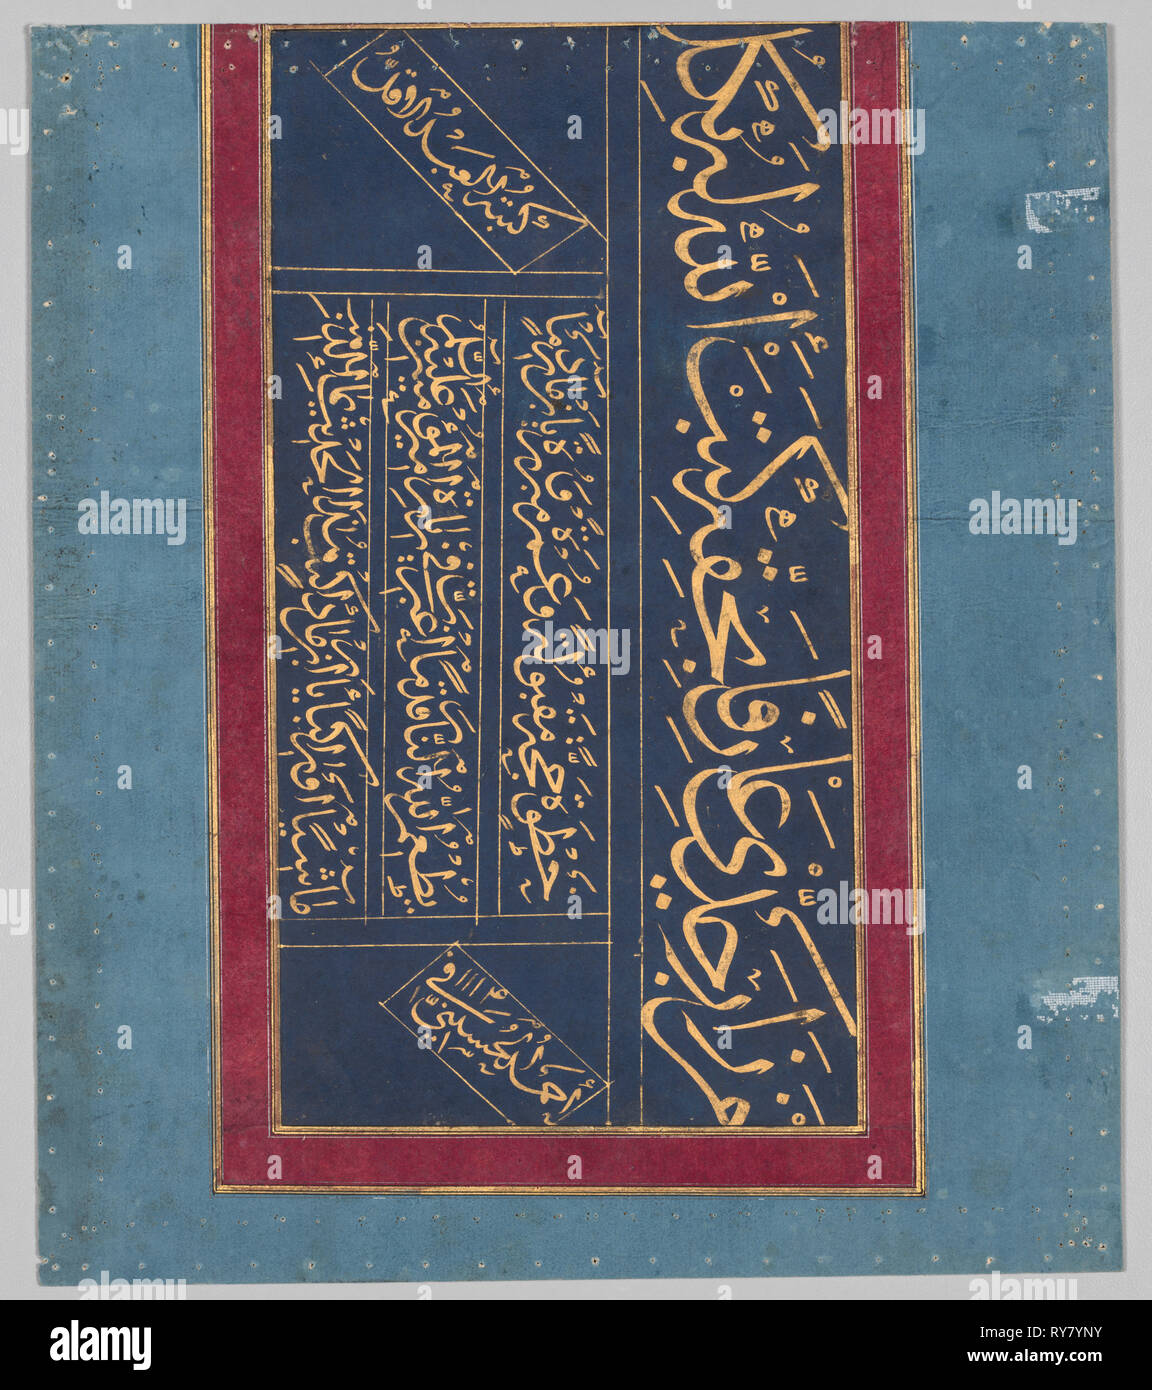 Calligraphy, 1702. Ahmad al-Husaini. Gold on blue paper, four lines of thuluth calligraphy (verso); page: 28.2 x 24.1 cm (11 1/8 x 9 1/2 in Stock Photo